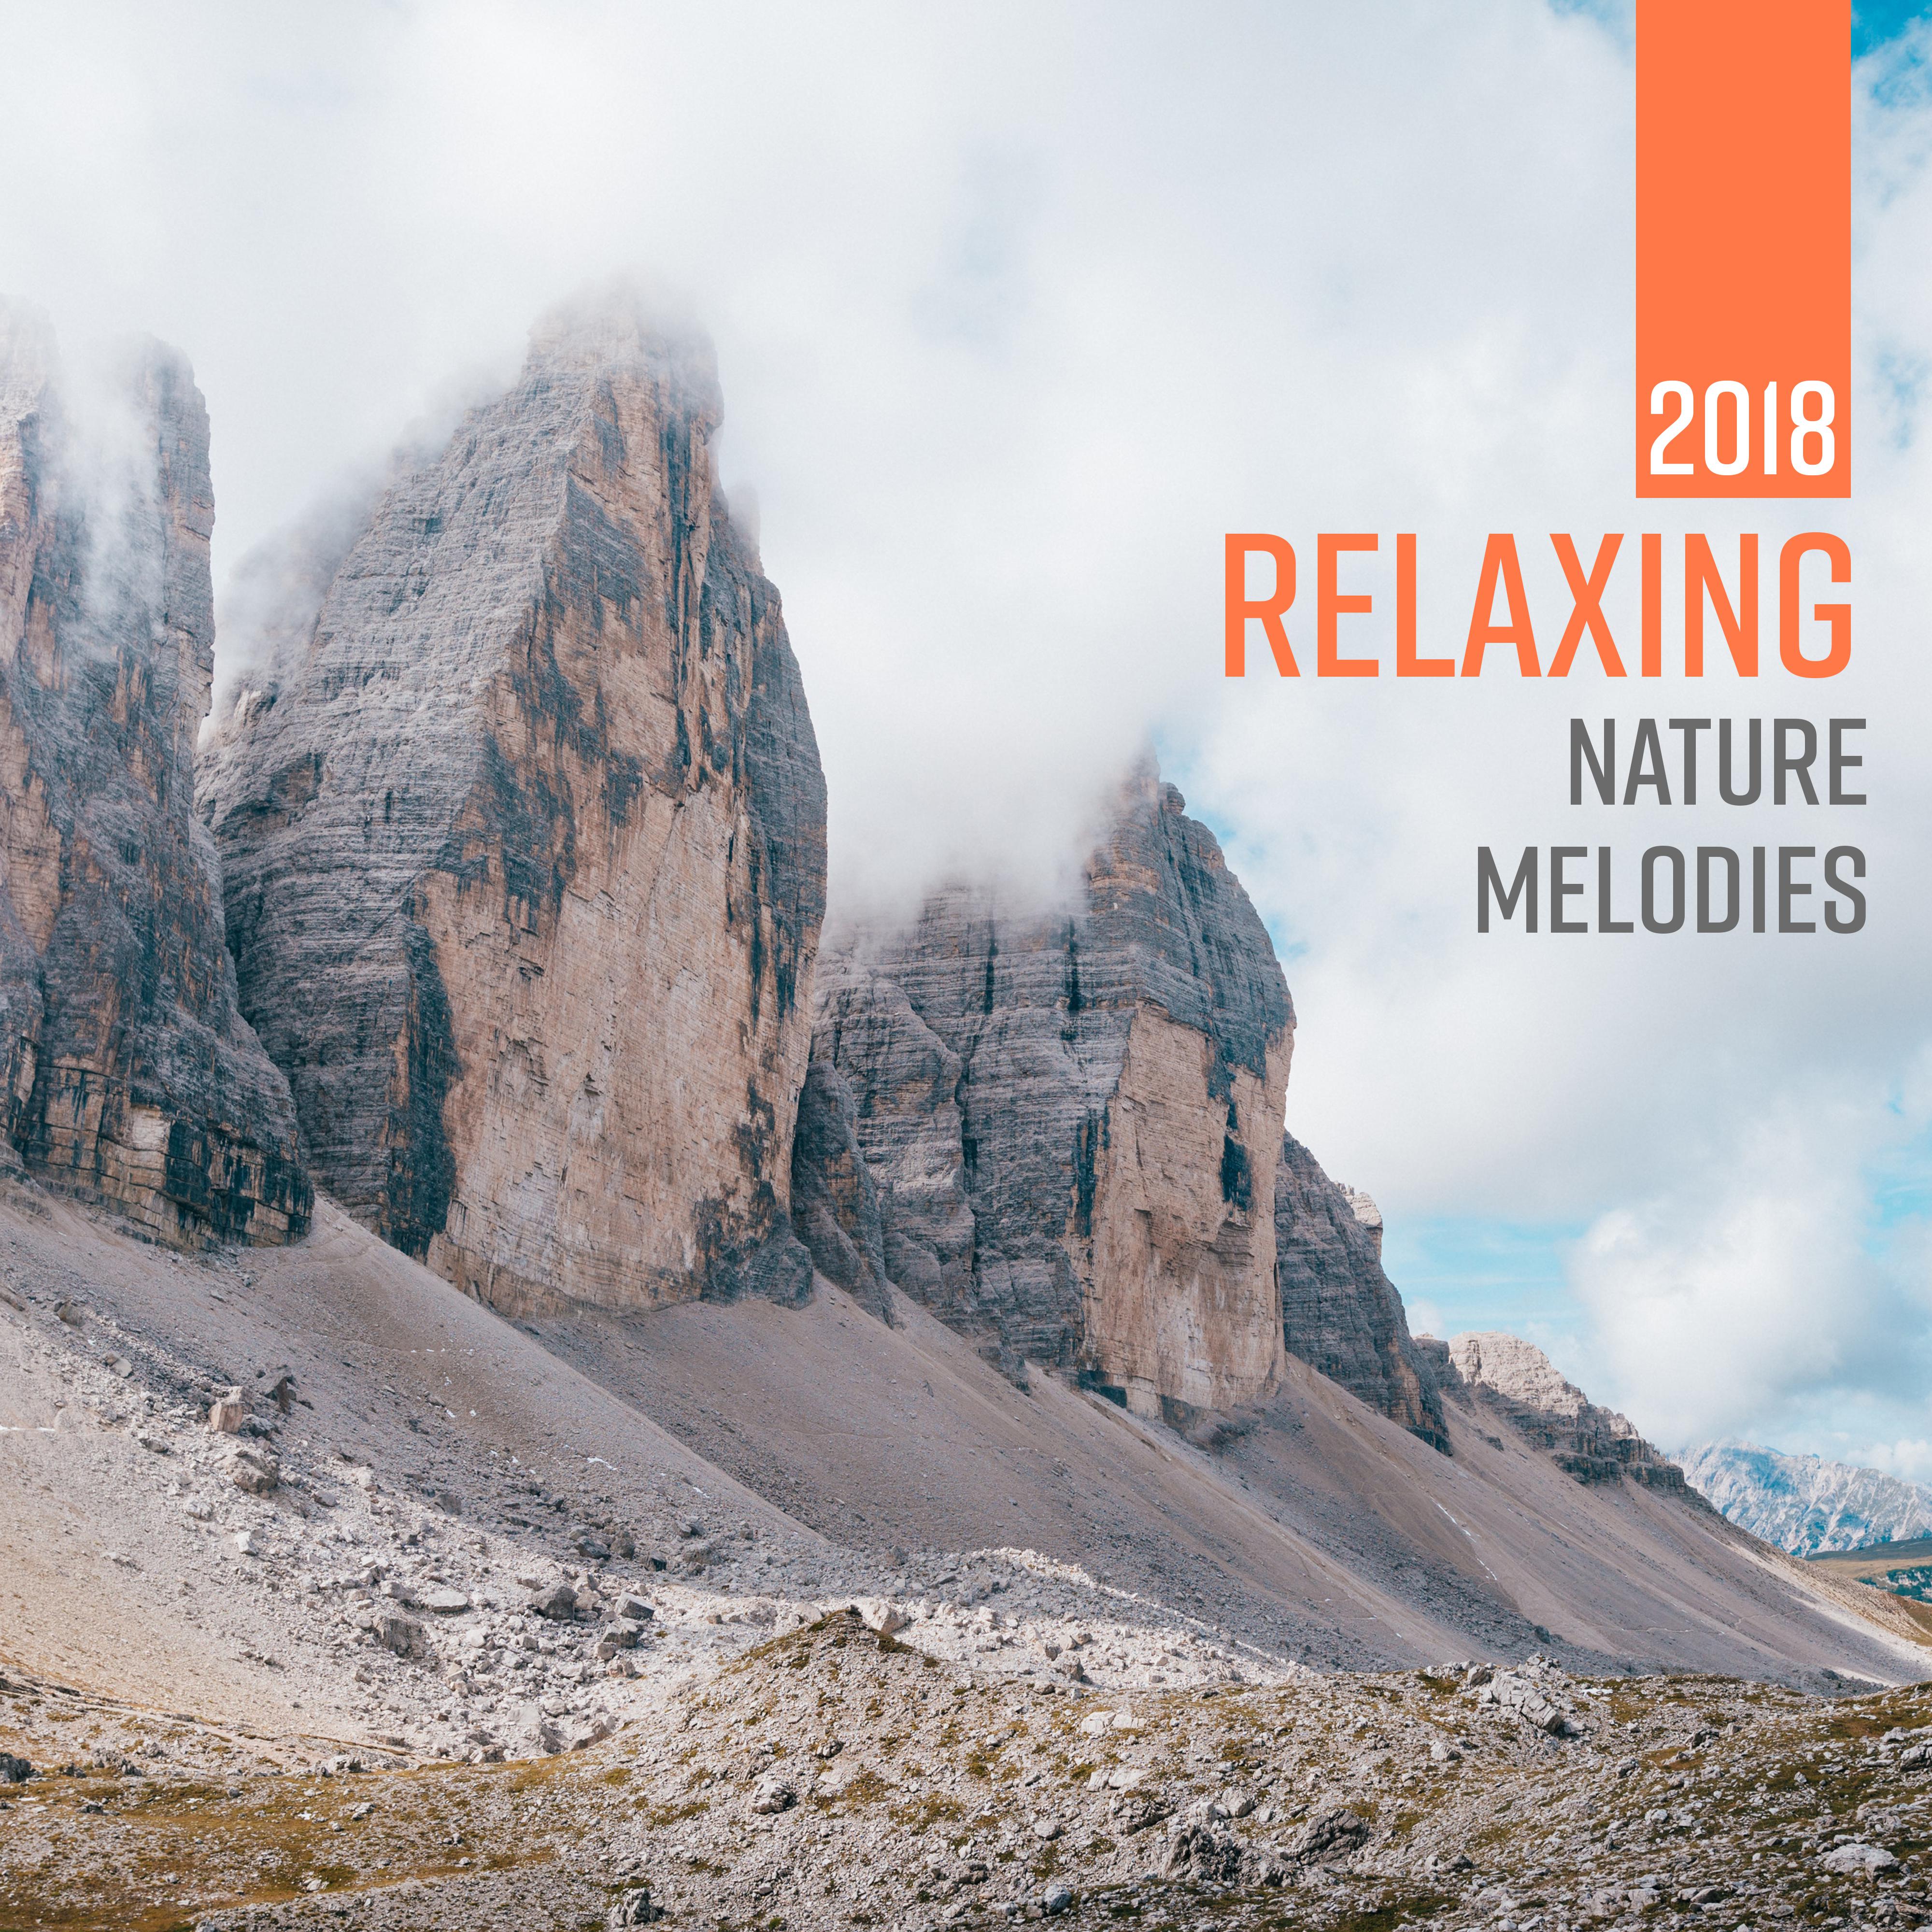 2018 Relaxing Nature Melodies